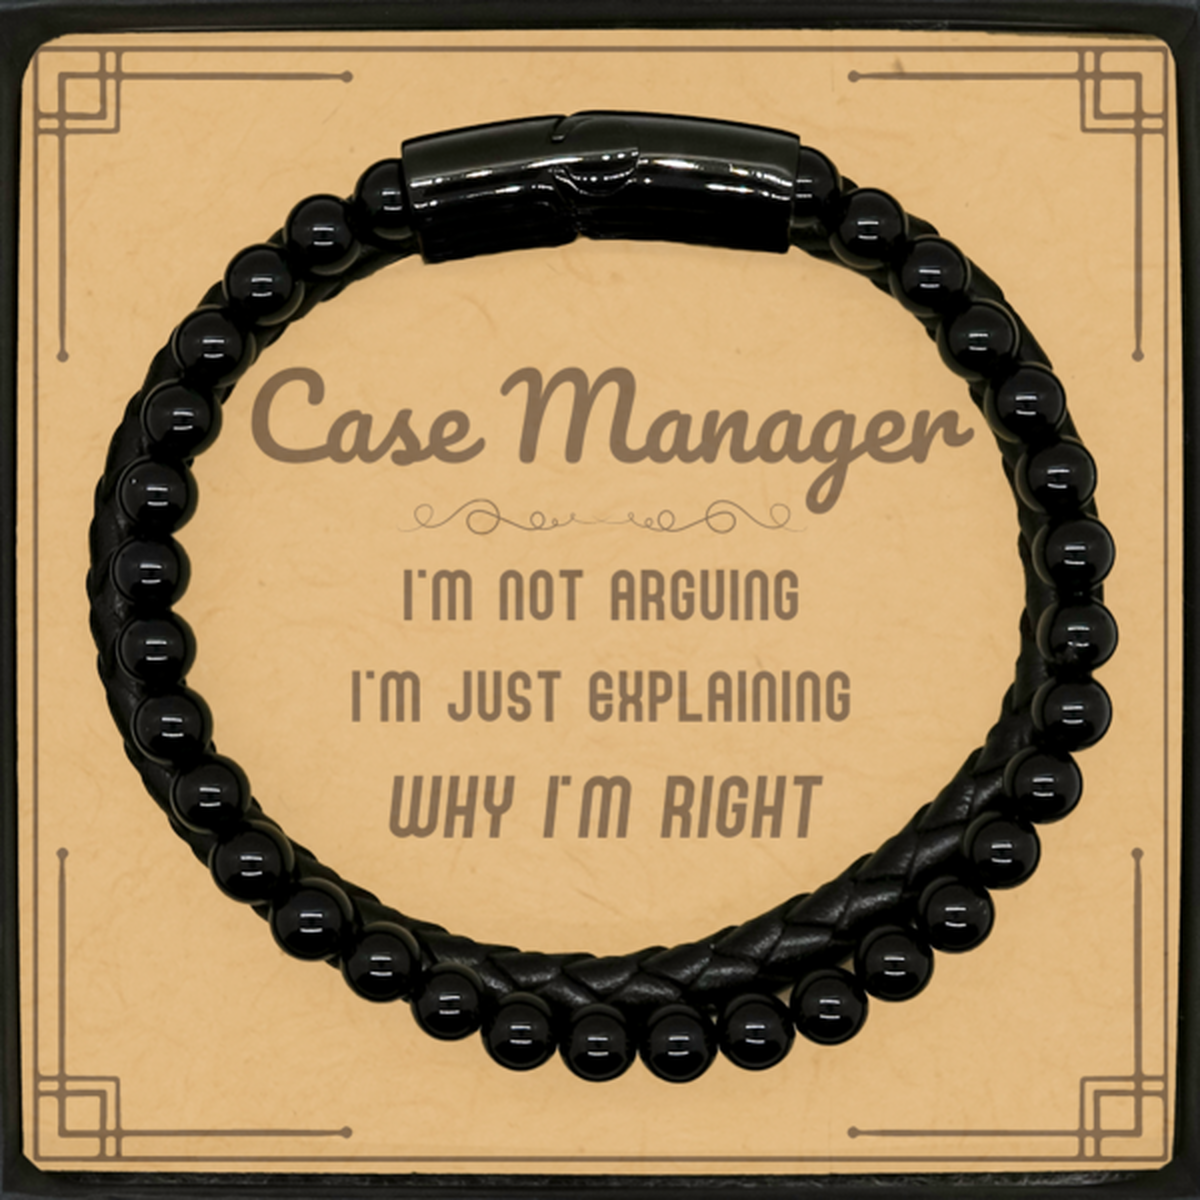 Case Manager I'm not Arguing. I'm Just Explaining Why I'm RIGHT Stone Leather Bracelets, Funny Saying Quote Case Manager Gifts For Case Manager Message Card Graduation Birthday Christmas Gifts for Men Women Coworker